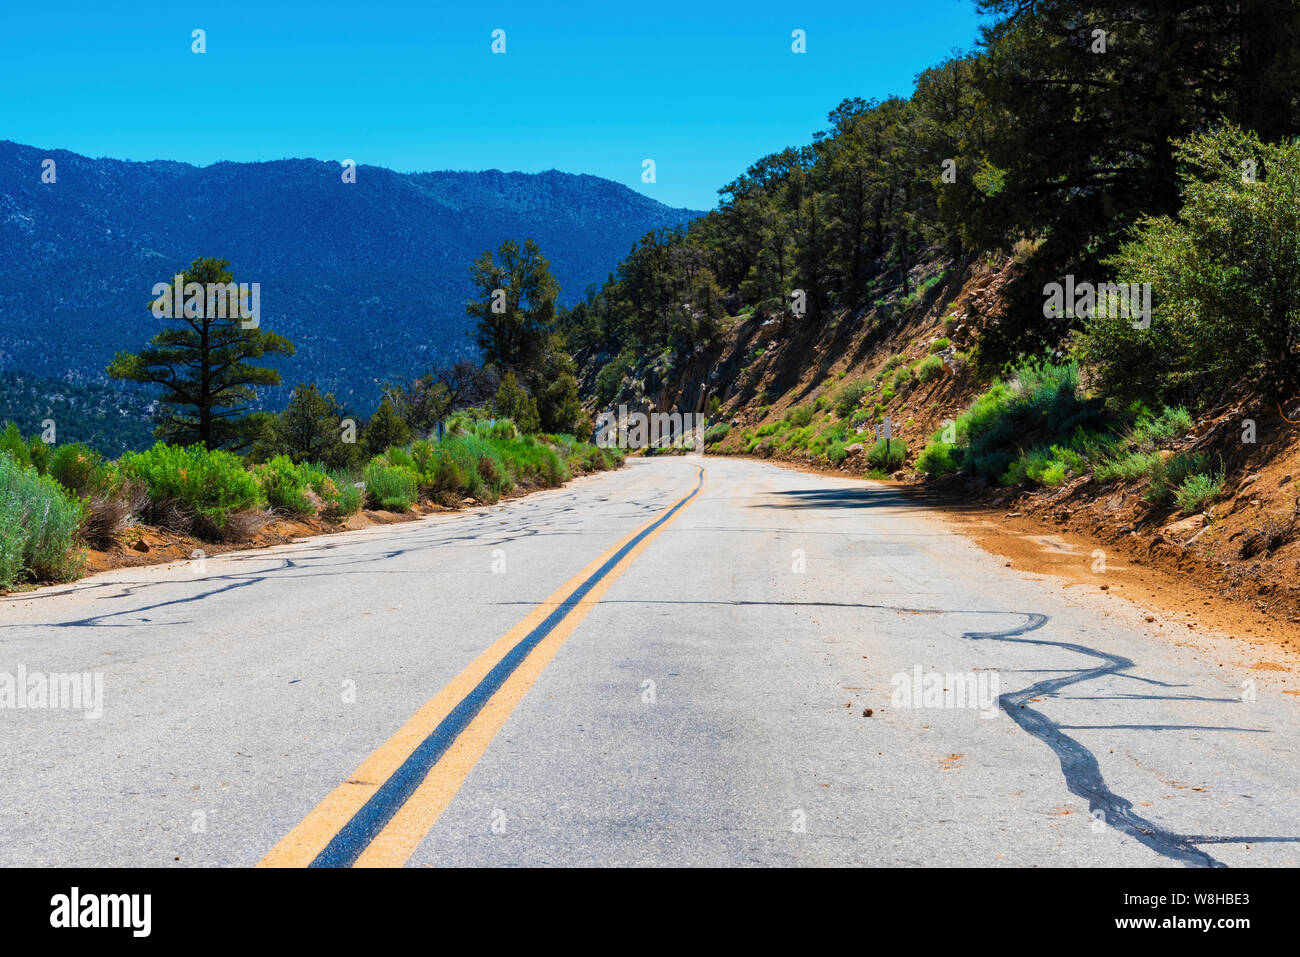 Narrow straight paved road with double yellow lines leading down hill towards mountains beyond under bright blue skies. Stock Photo